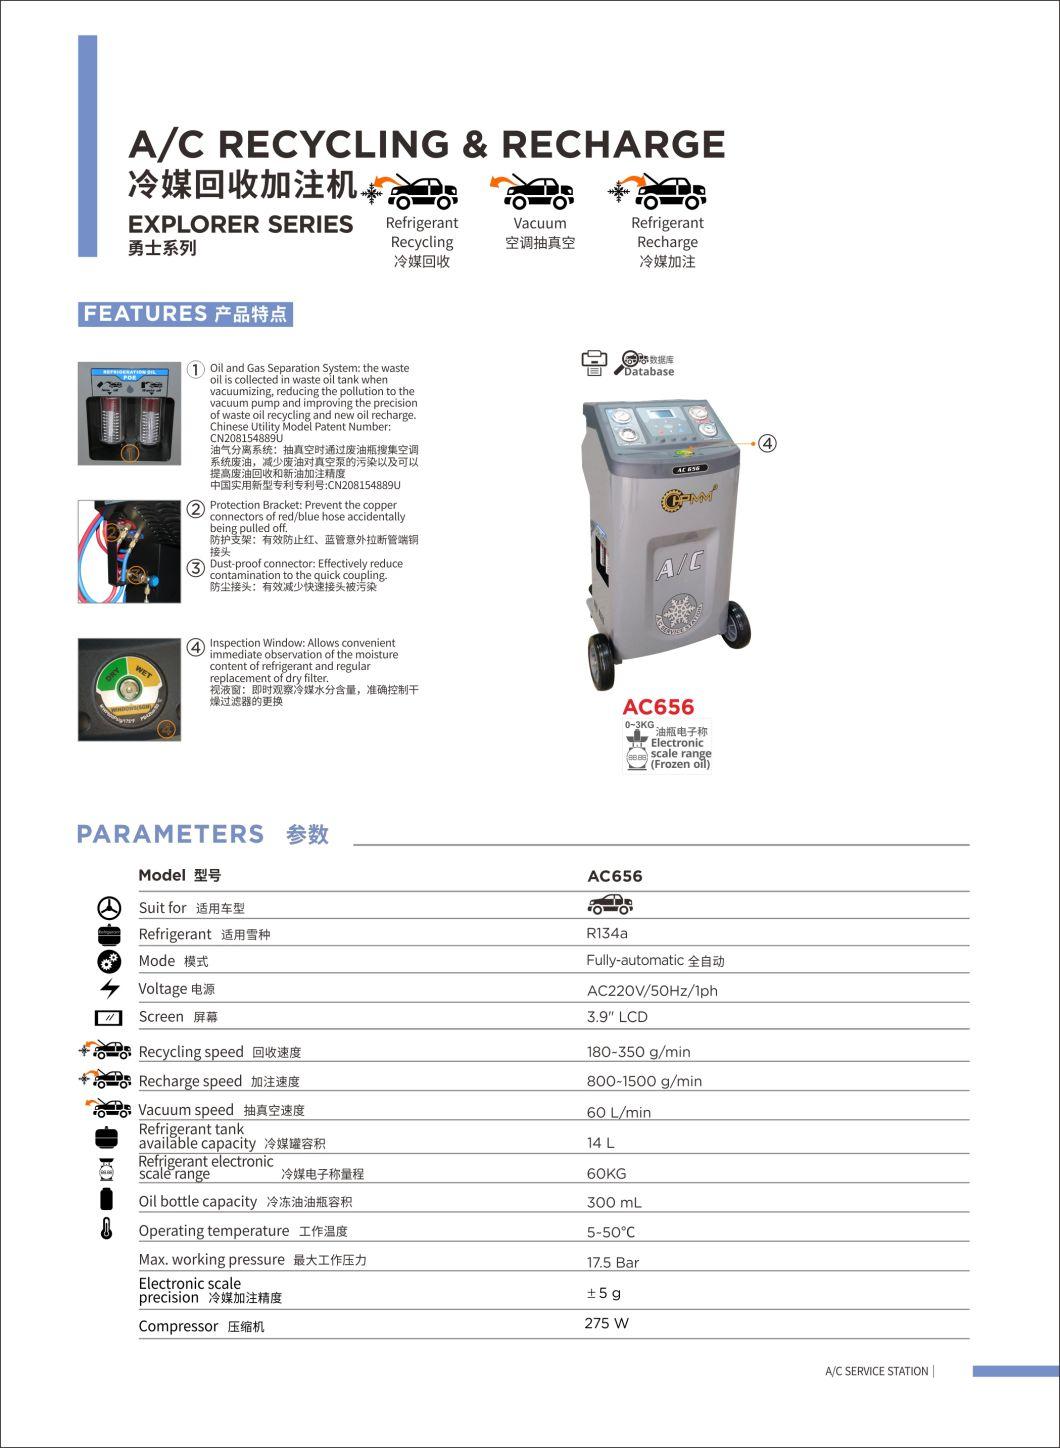 A/C Recovery Machine AC656 A/C Recycling & Recharger R-134A Refrigerant Recovery, Recycling and Recharging Machine